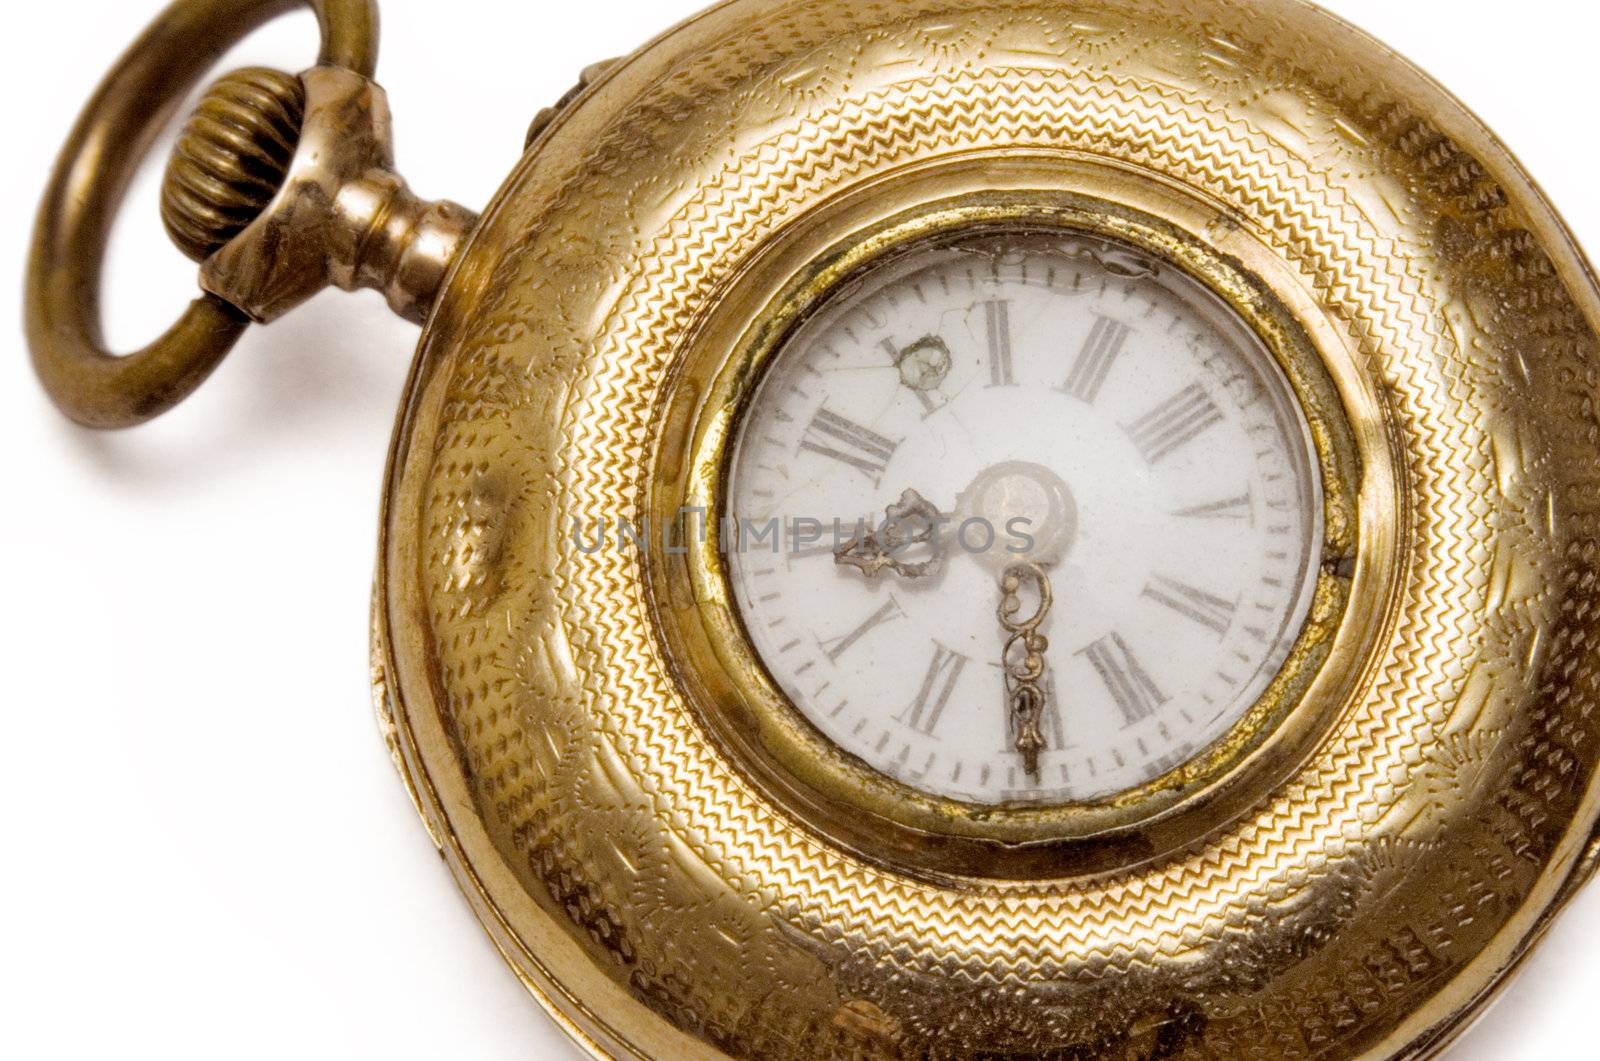 Vintage golden pocket watch isolated on a white background.